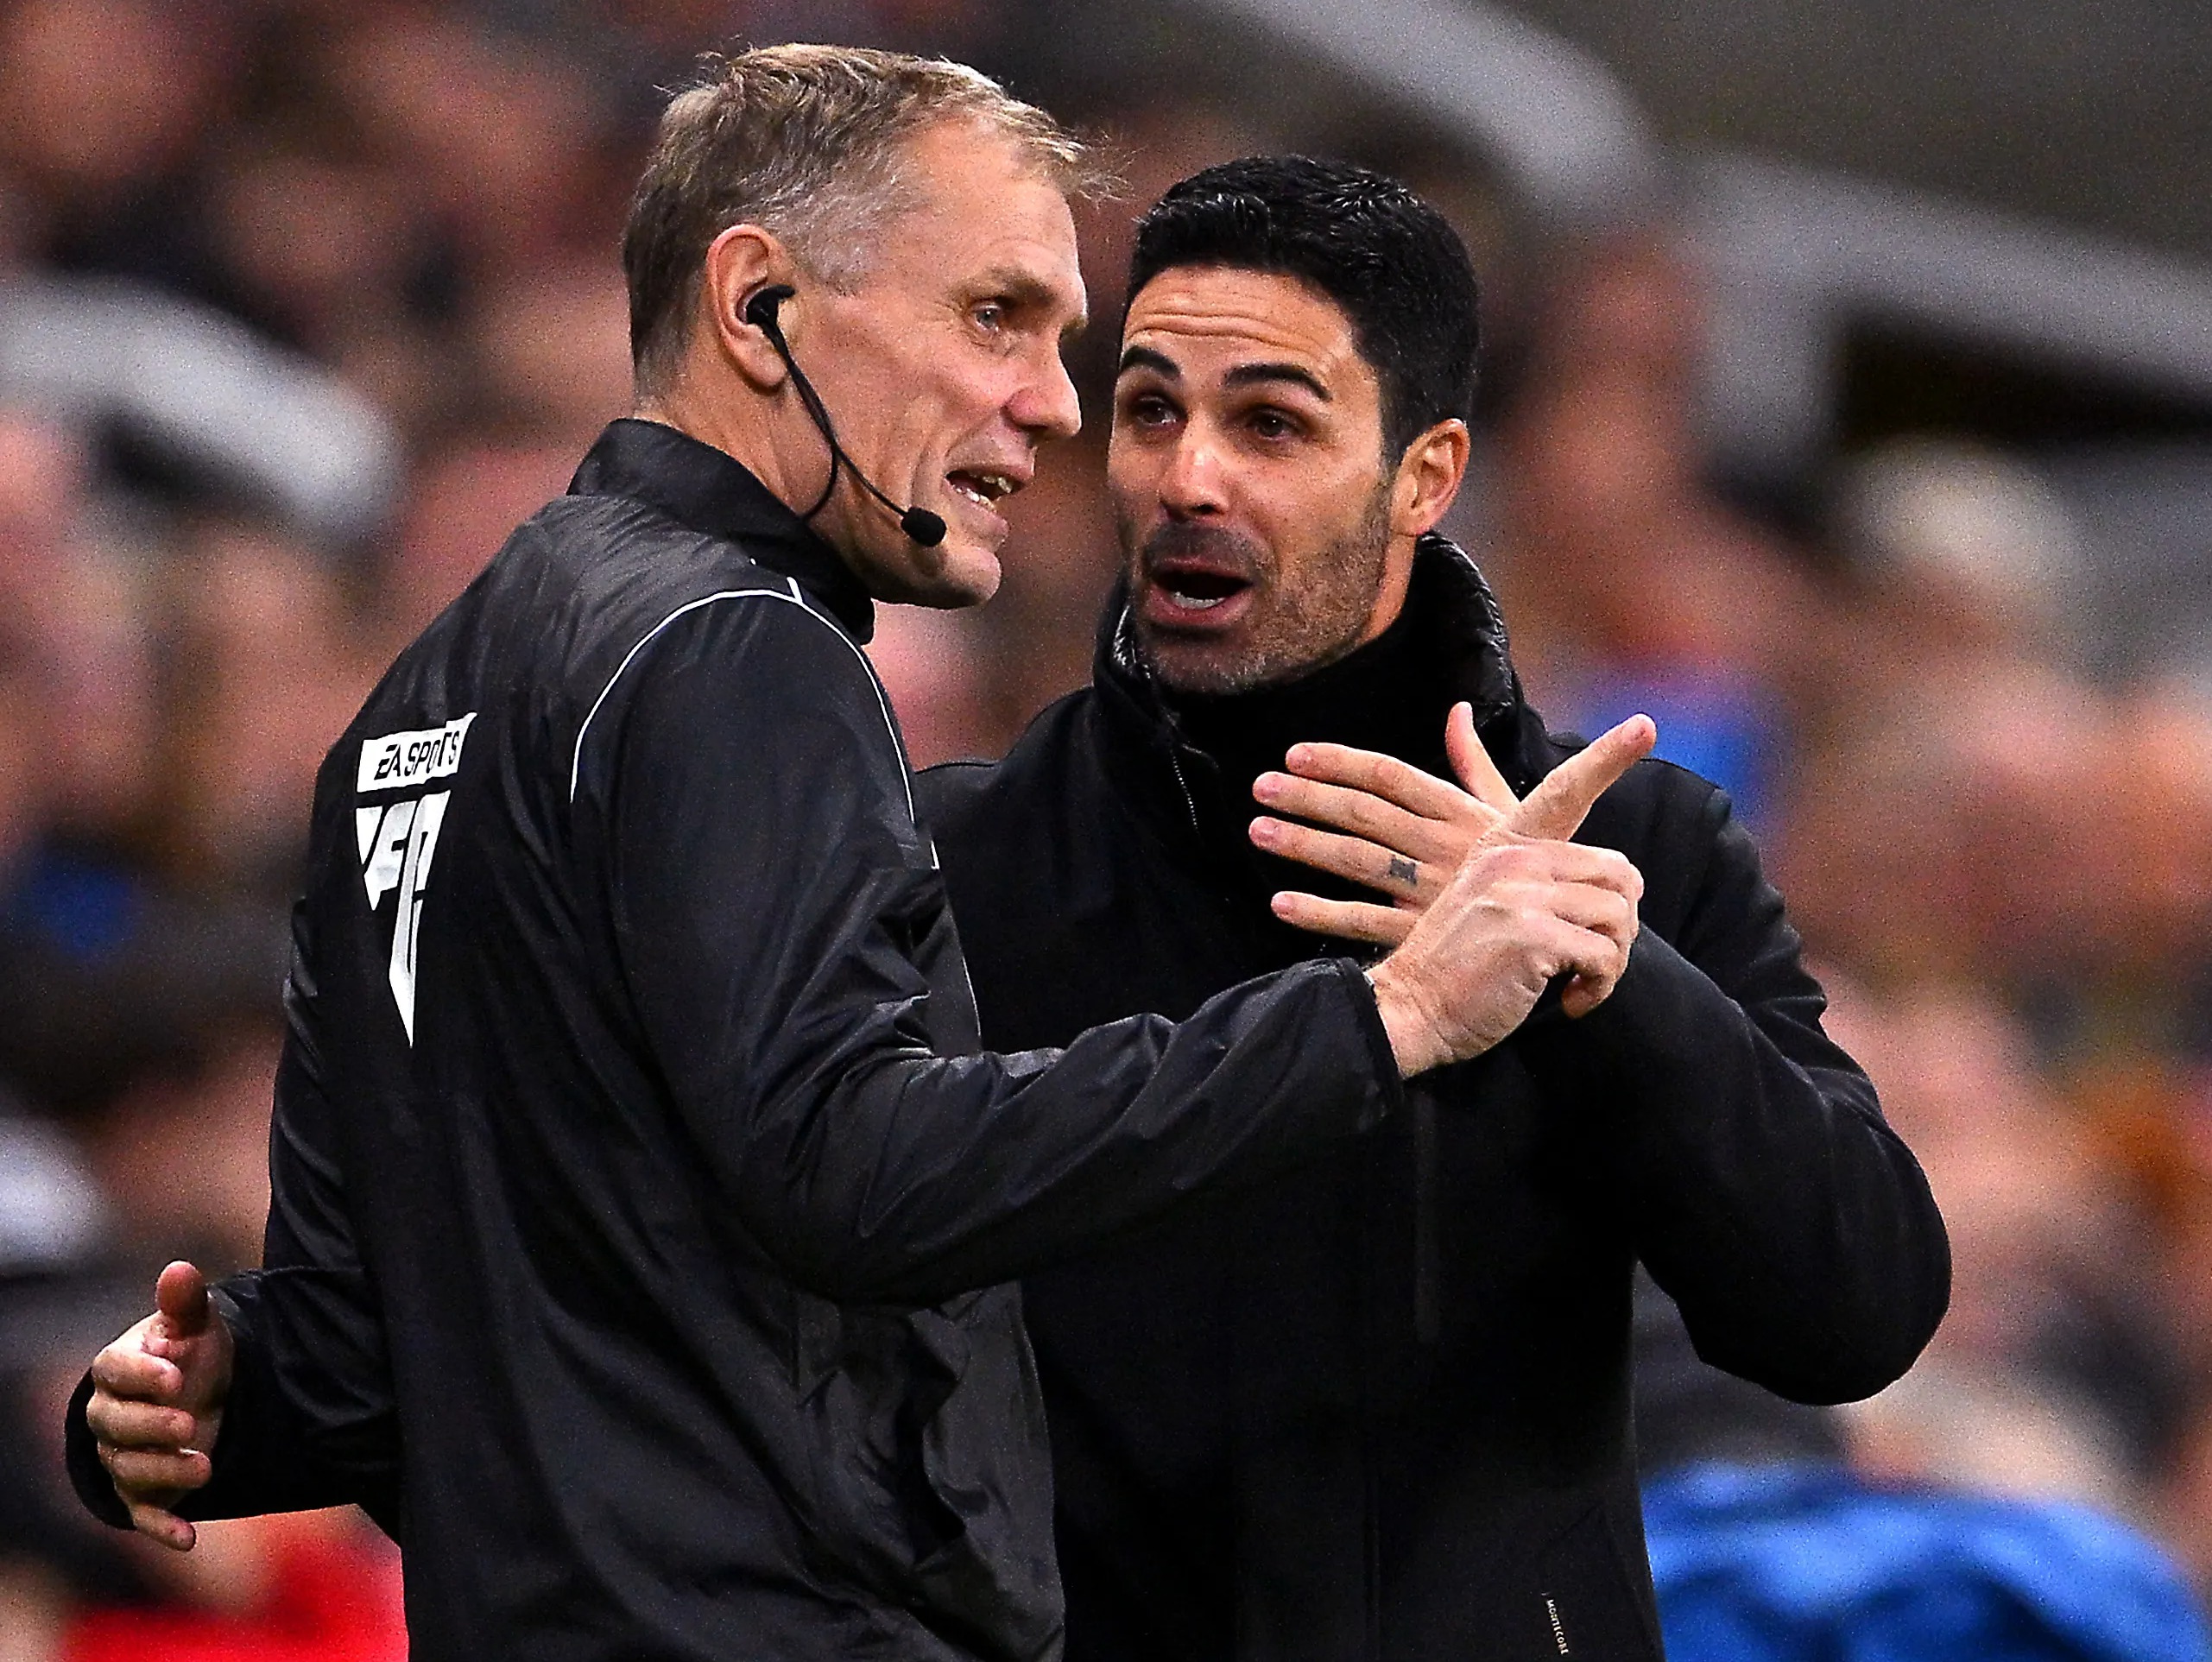 Mikel Arteta raged at the officials during and after Arsenal's loss to Newcastle